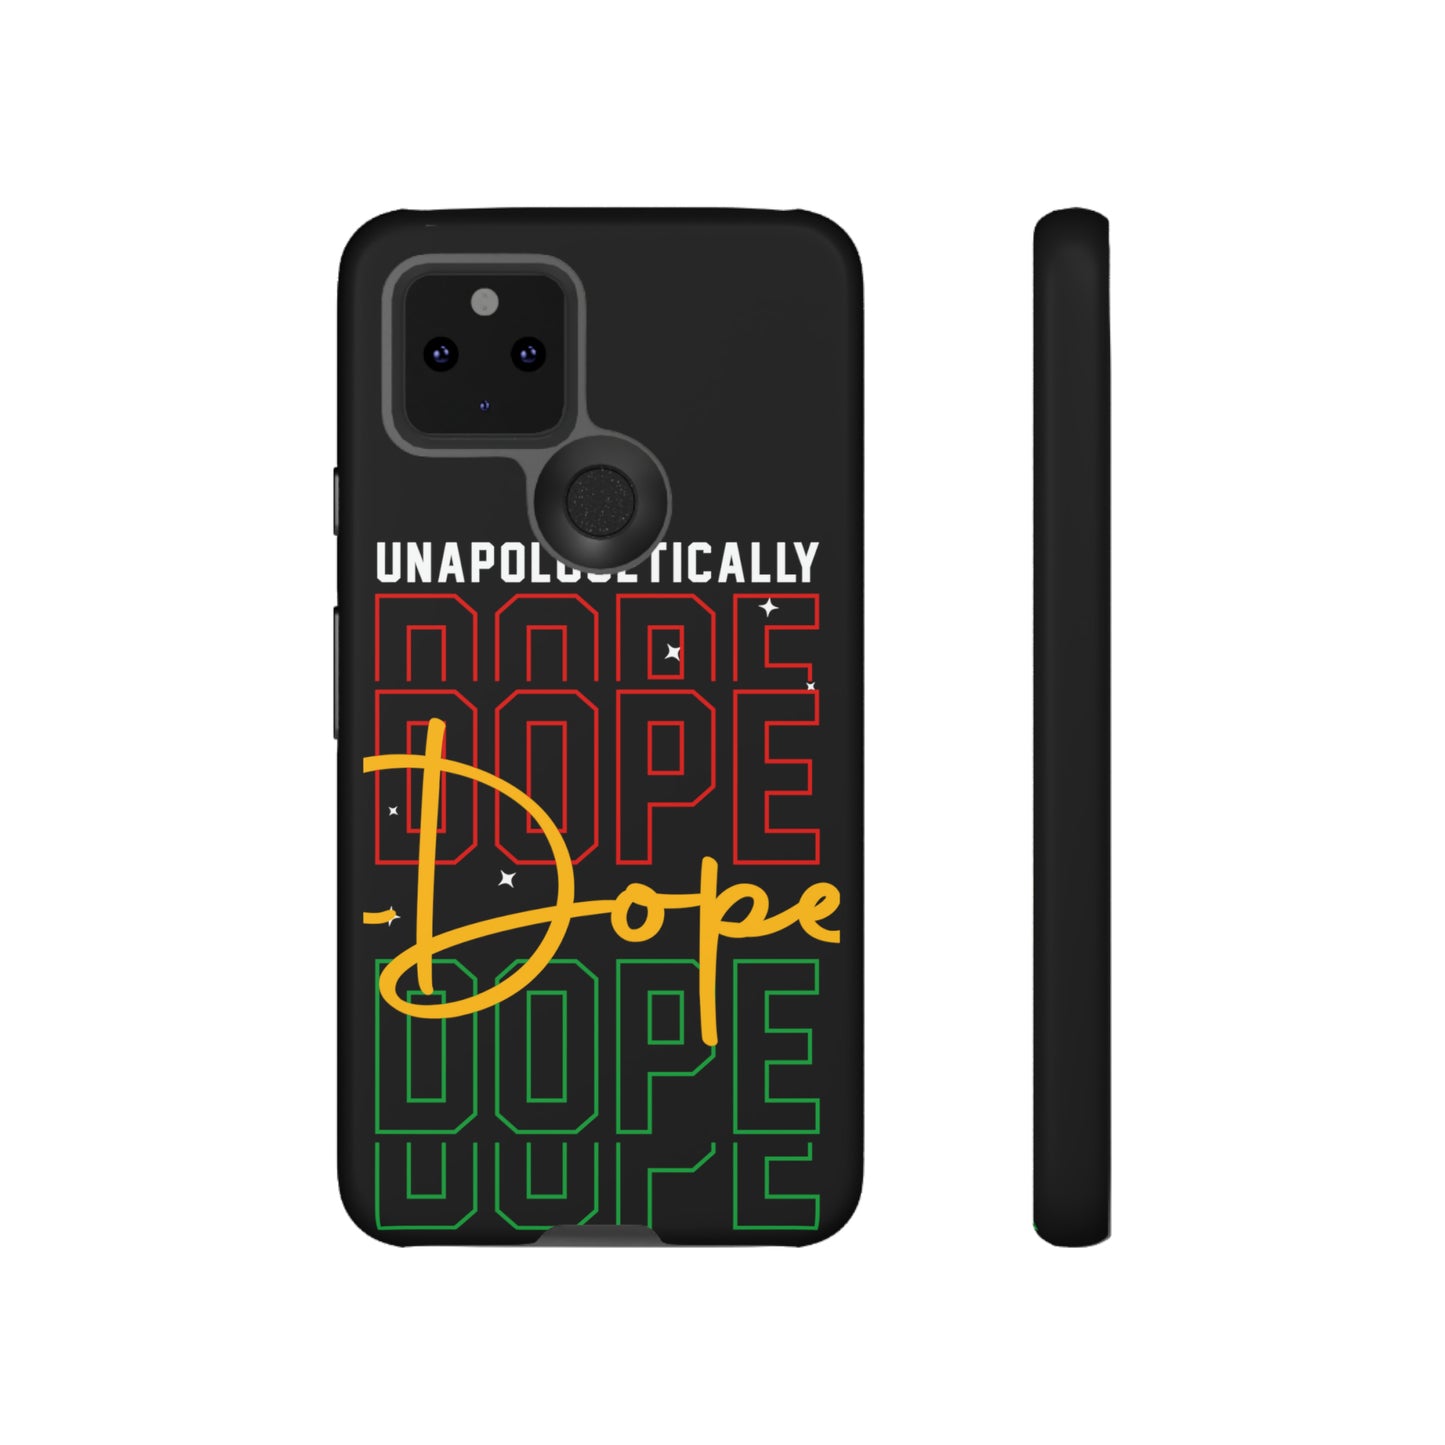 Unapologetically Dope Tough Phone Cases